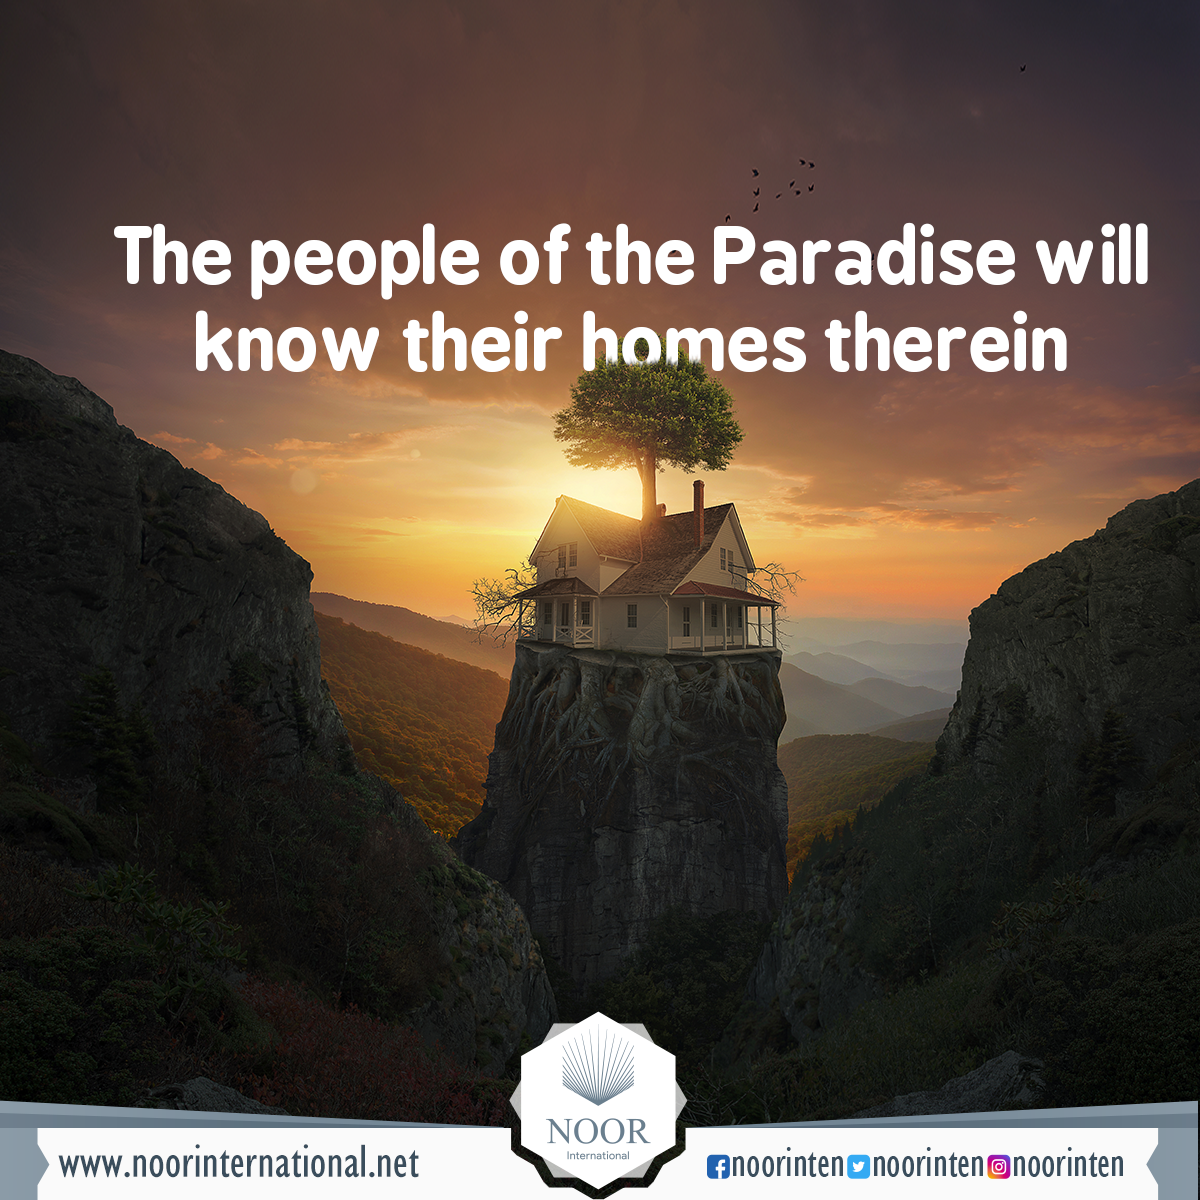 The people of the Paradise will know their homes therein